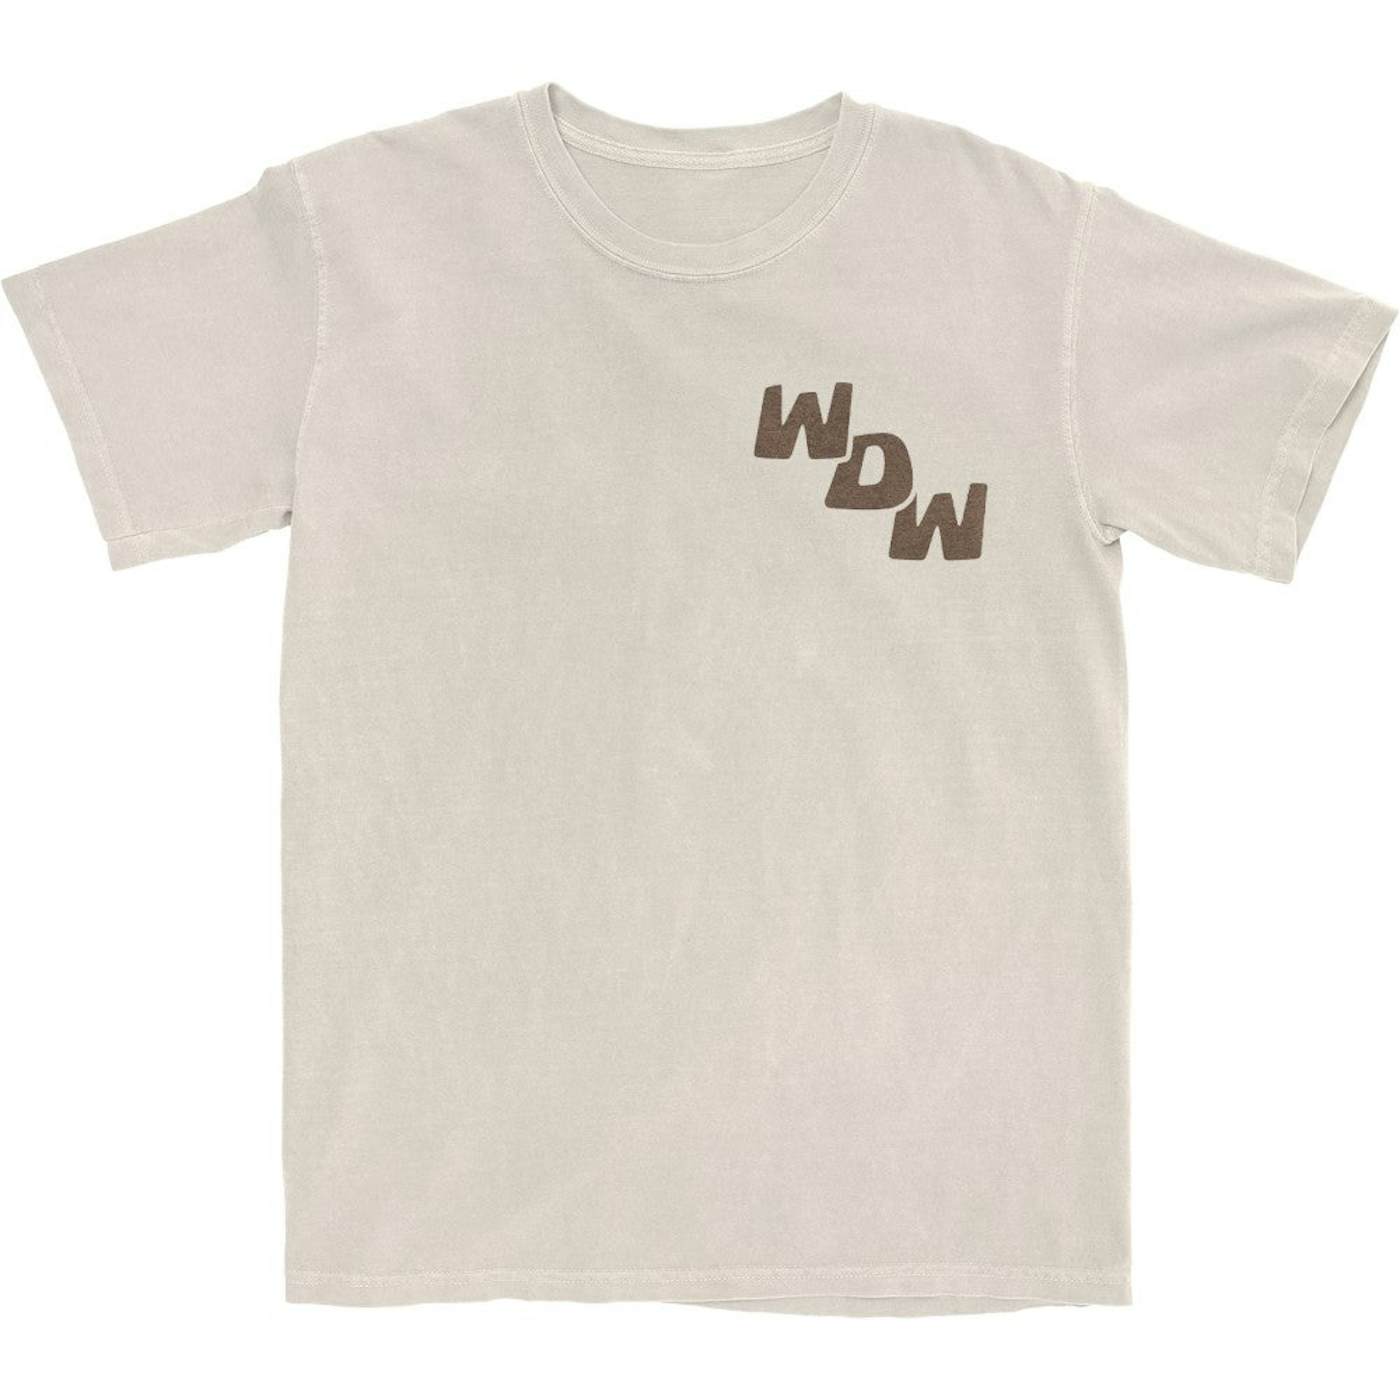 Why Don't We WDW Overlap Vintage White T-Shirt (Limited Quantity)